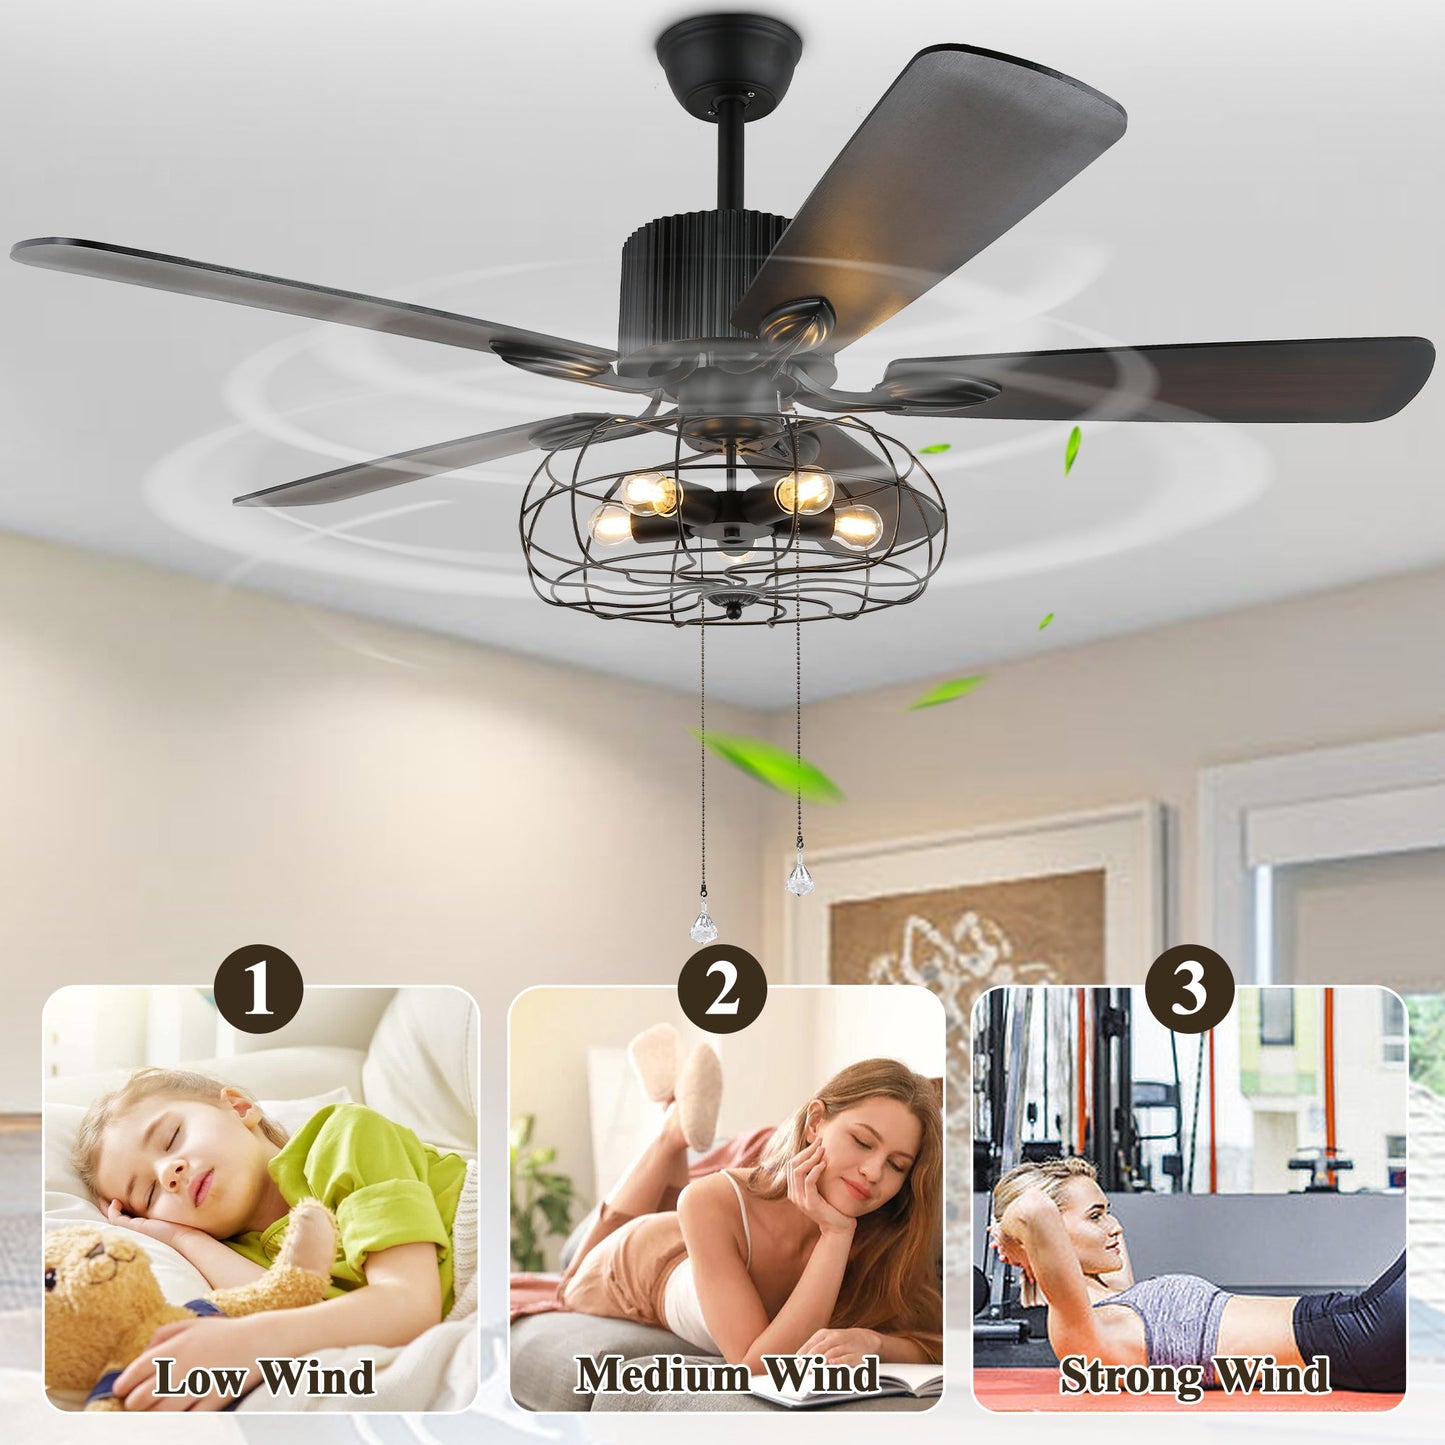 42"/48"/52" 5-Light Black Vintage Industrial Ceiling Fan with Remote, Reversible